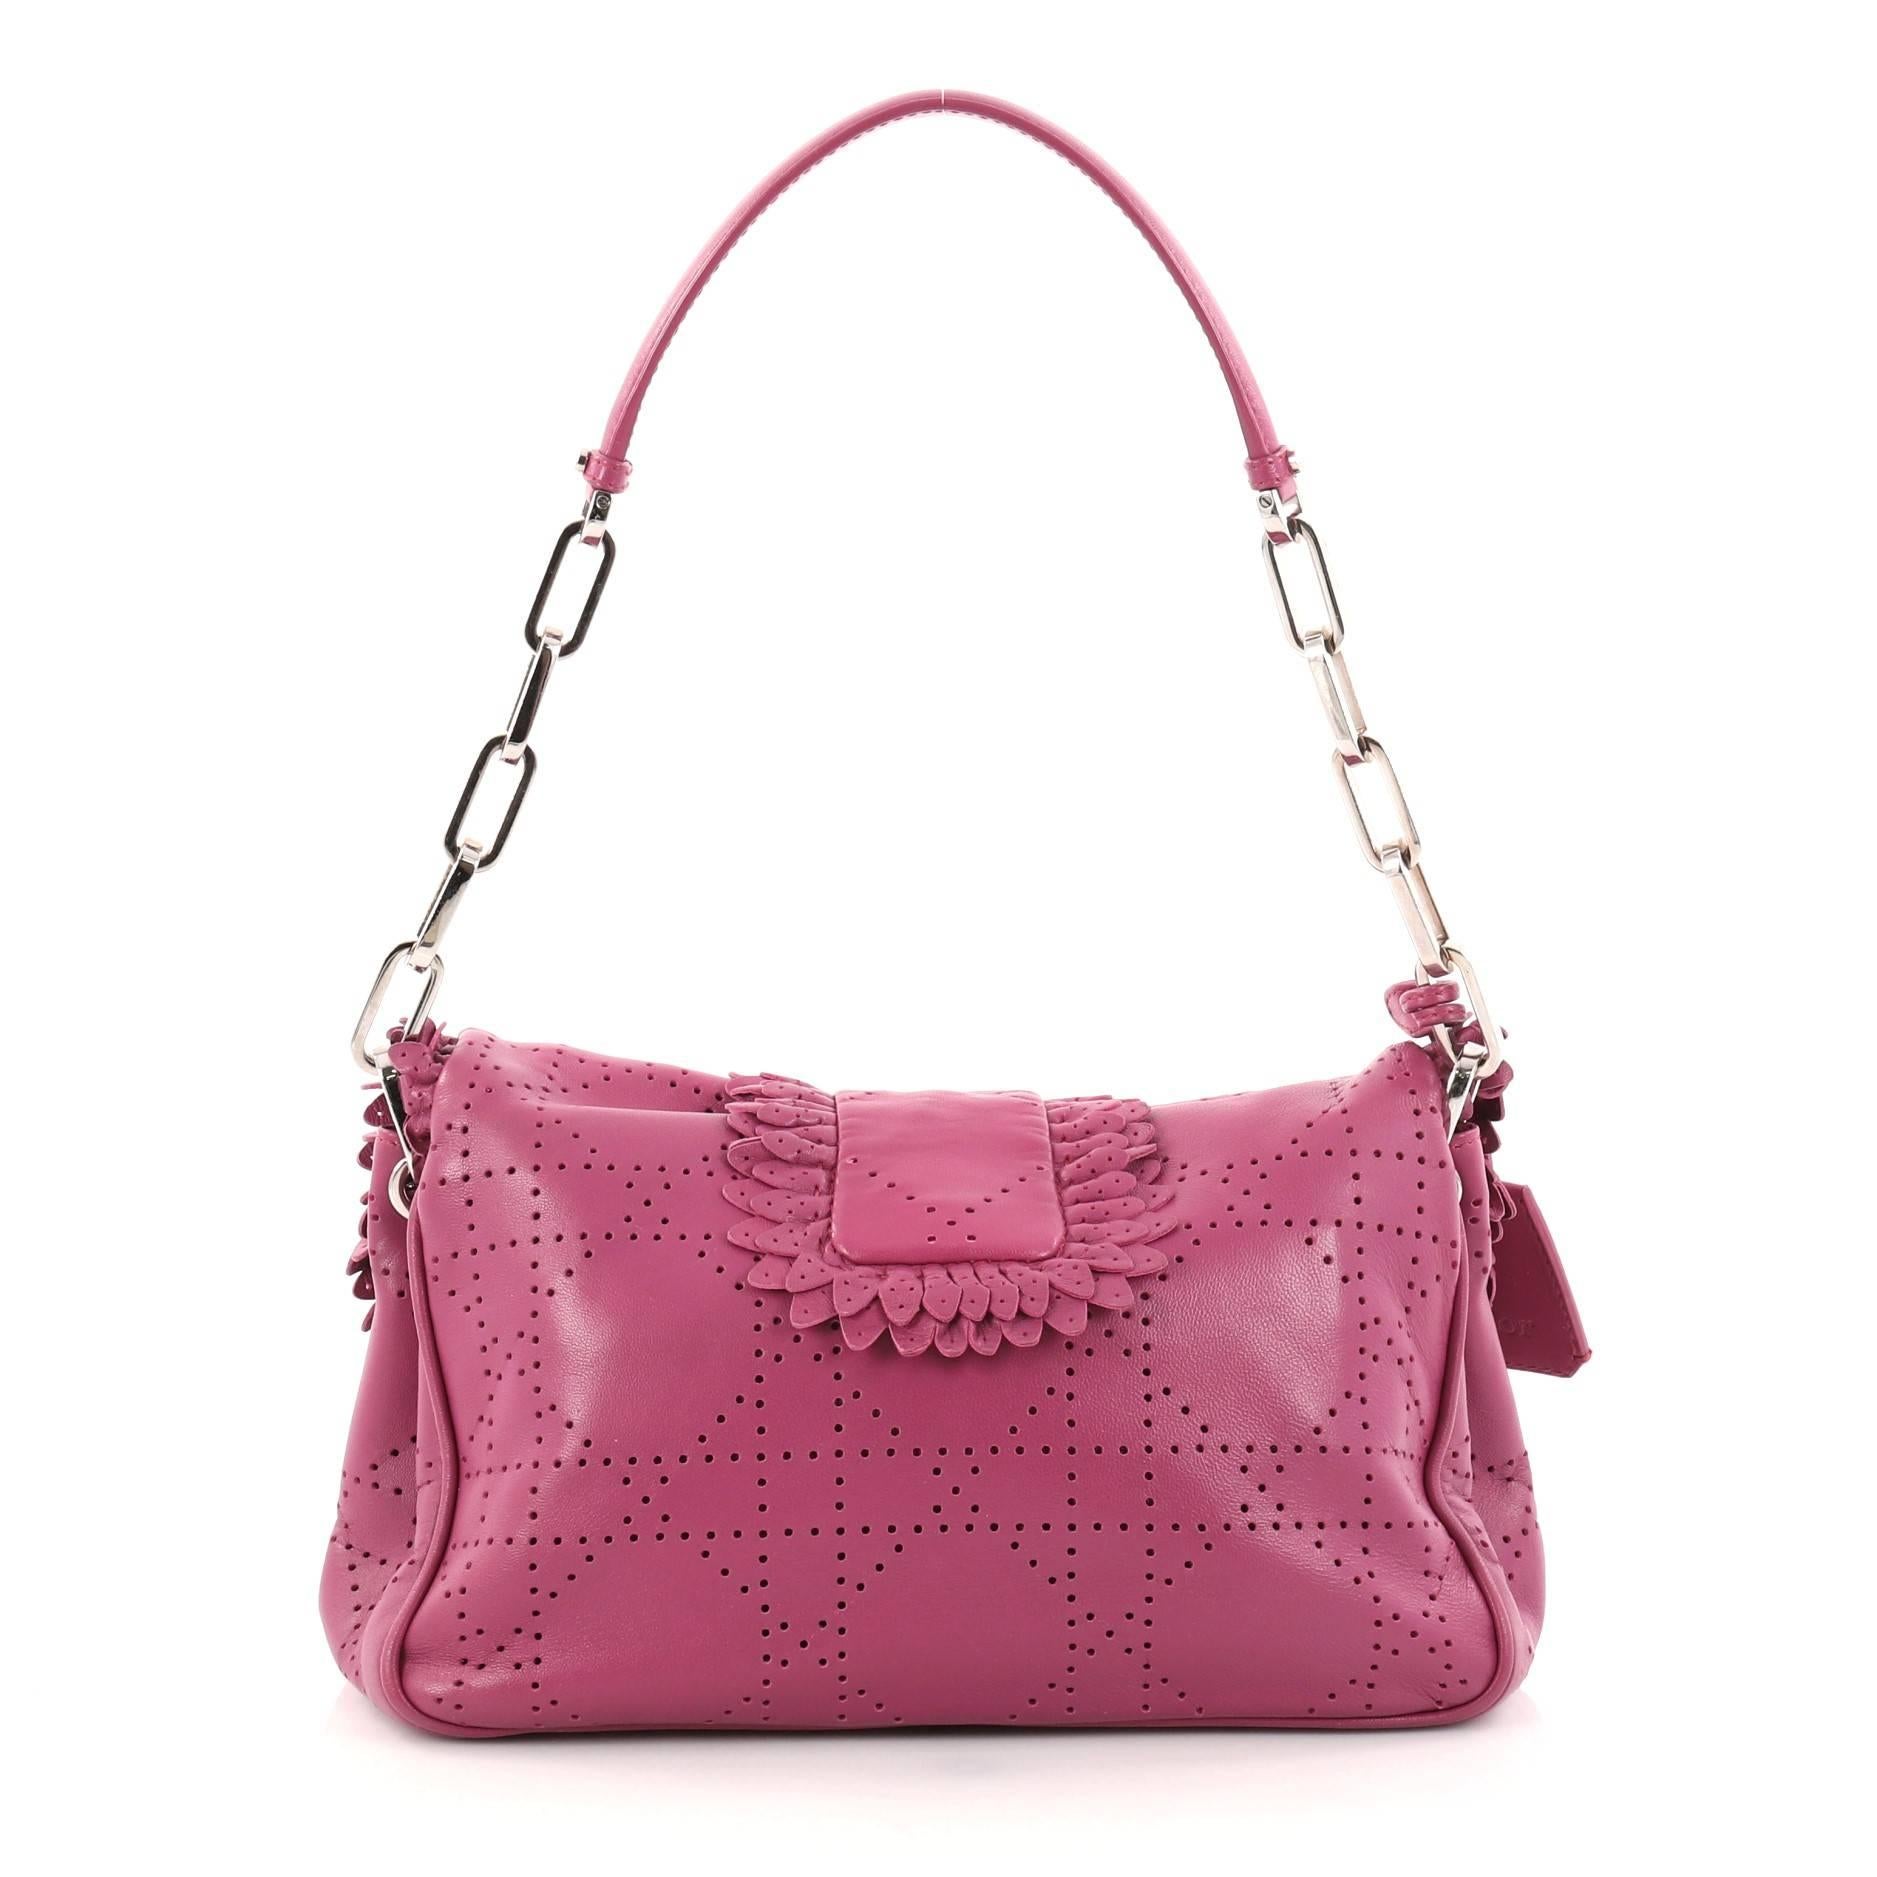 Pink Christian Dior New Lock Ruffle Flap Bag Perforated Leather